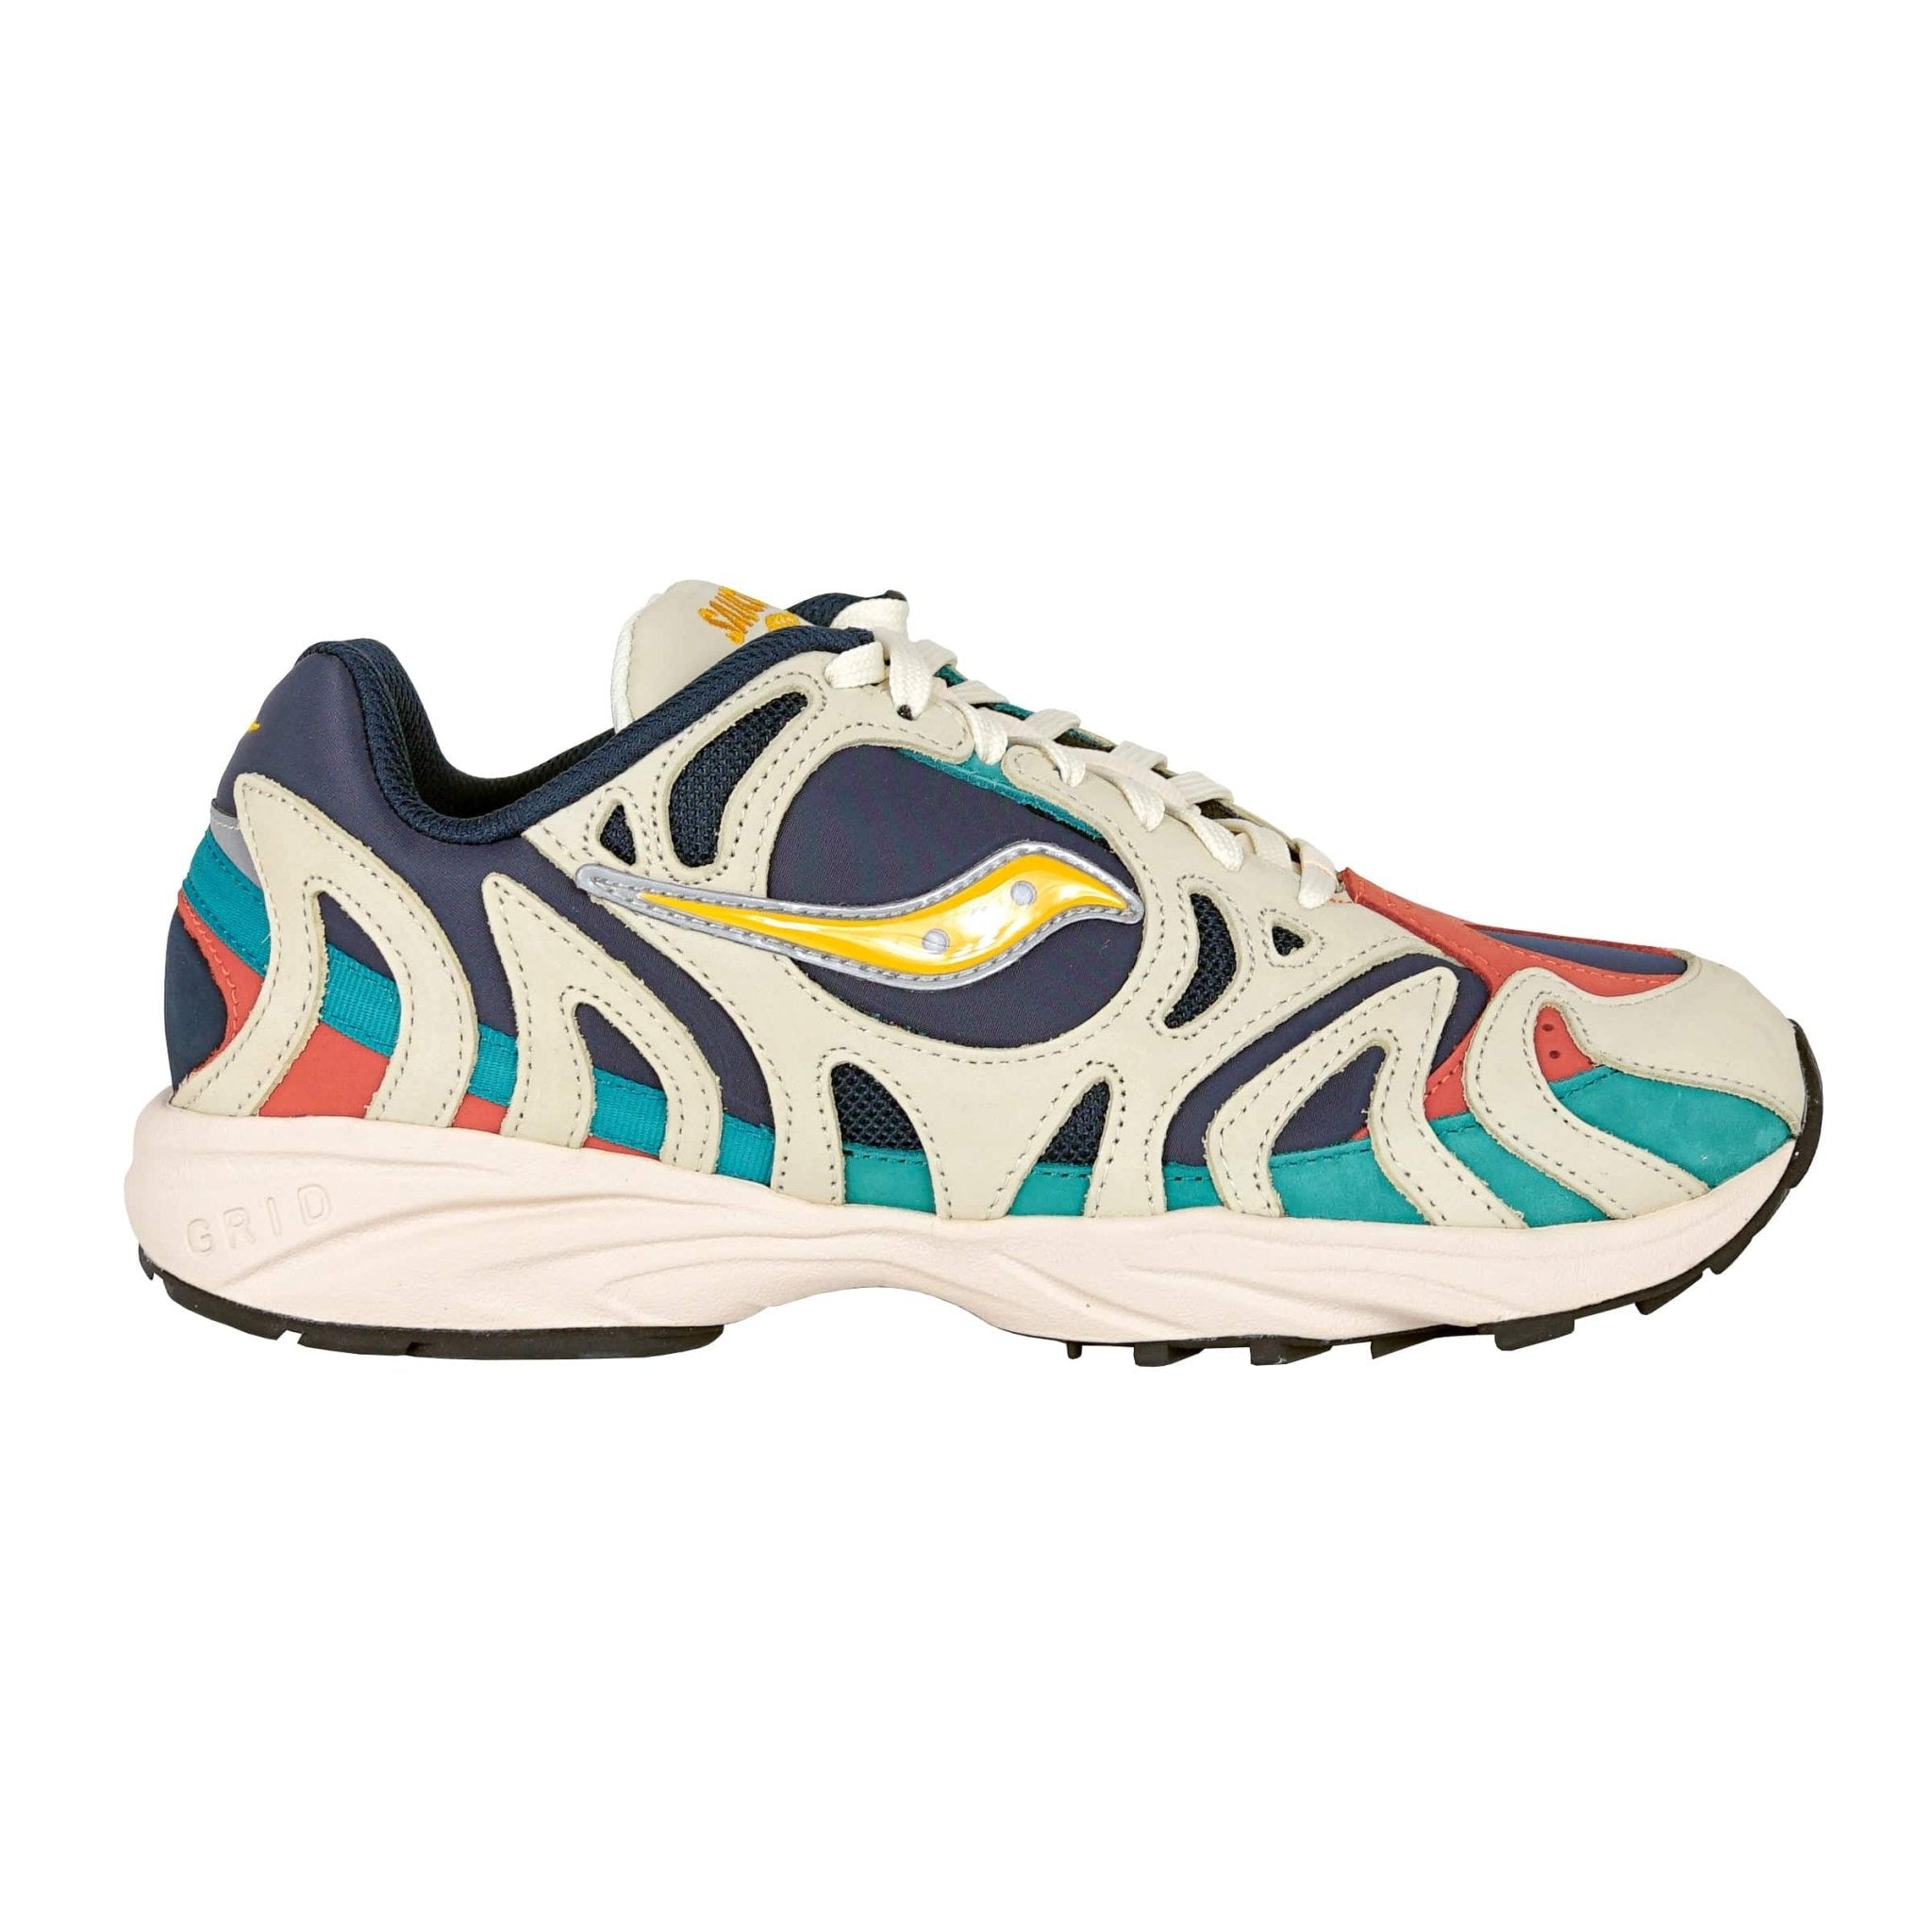 Grid Azura 2000 in white and blue - Saucony - State Of Flux